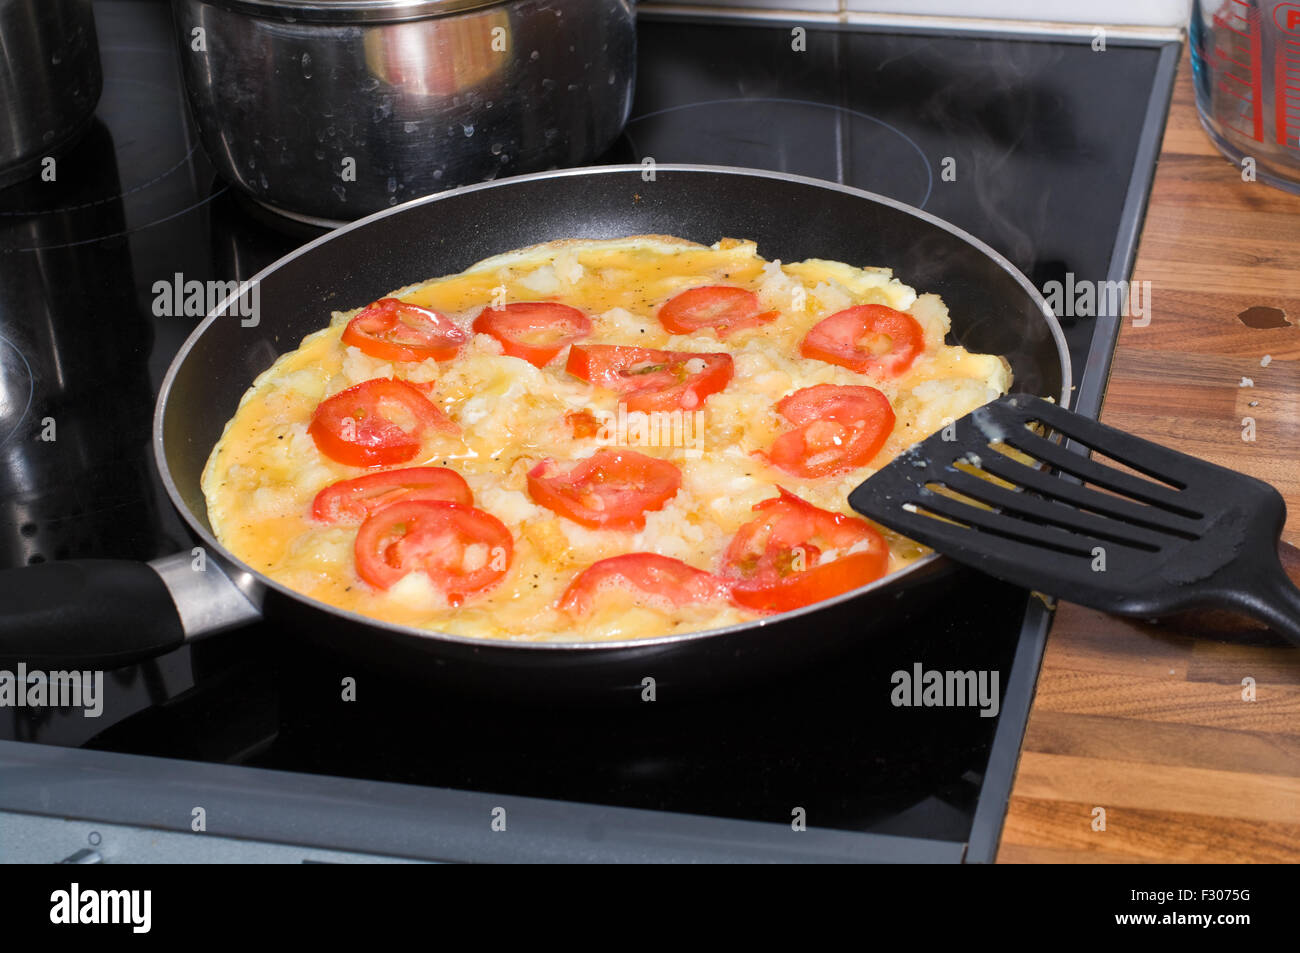 Spanish omelette with tomatoes being cooked in a frying pan. Stock Photo